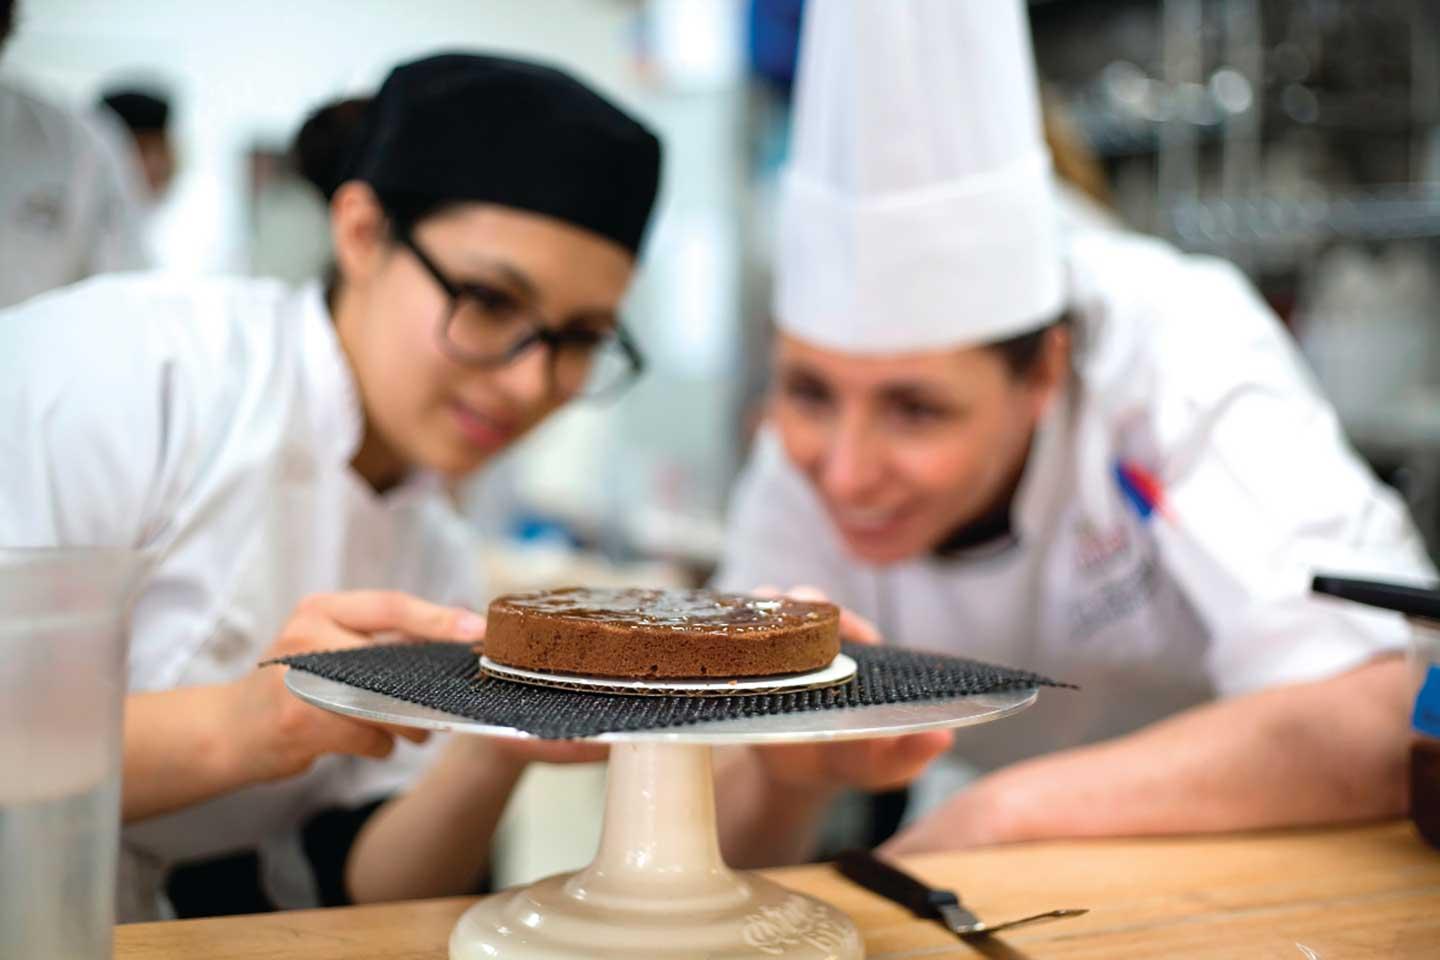 How To Become A Pastry Chef  The Bakers Guide - Escoffier